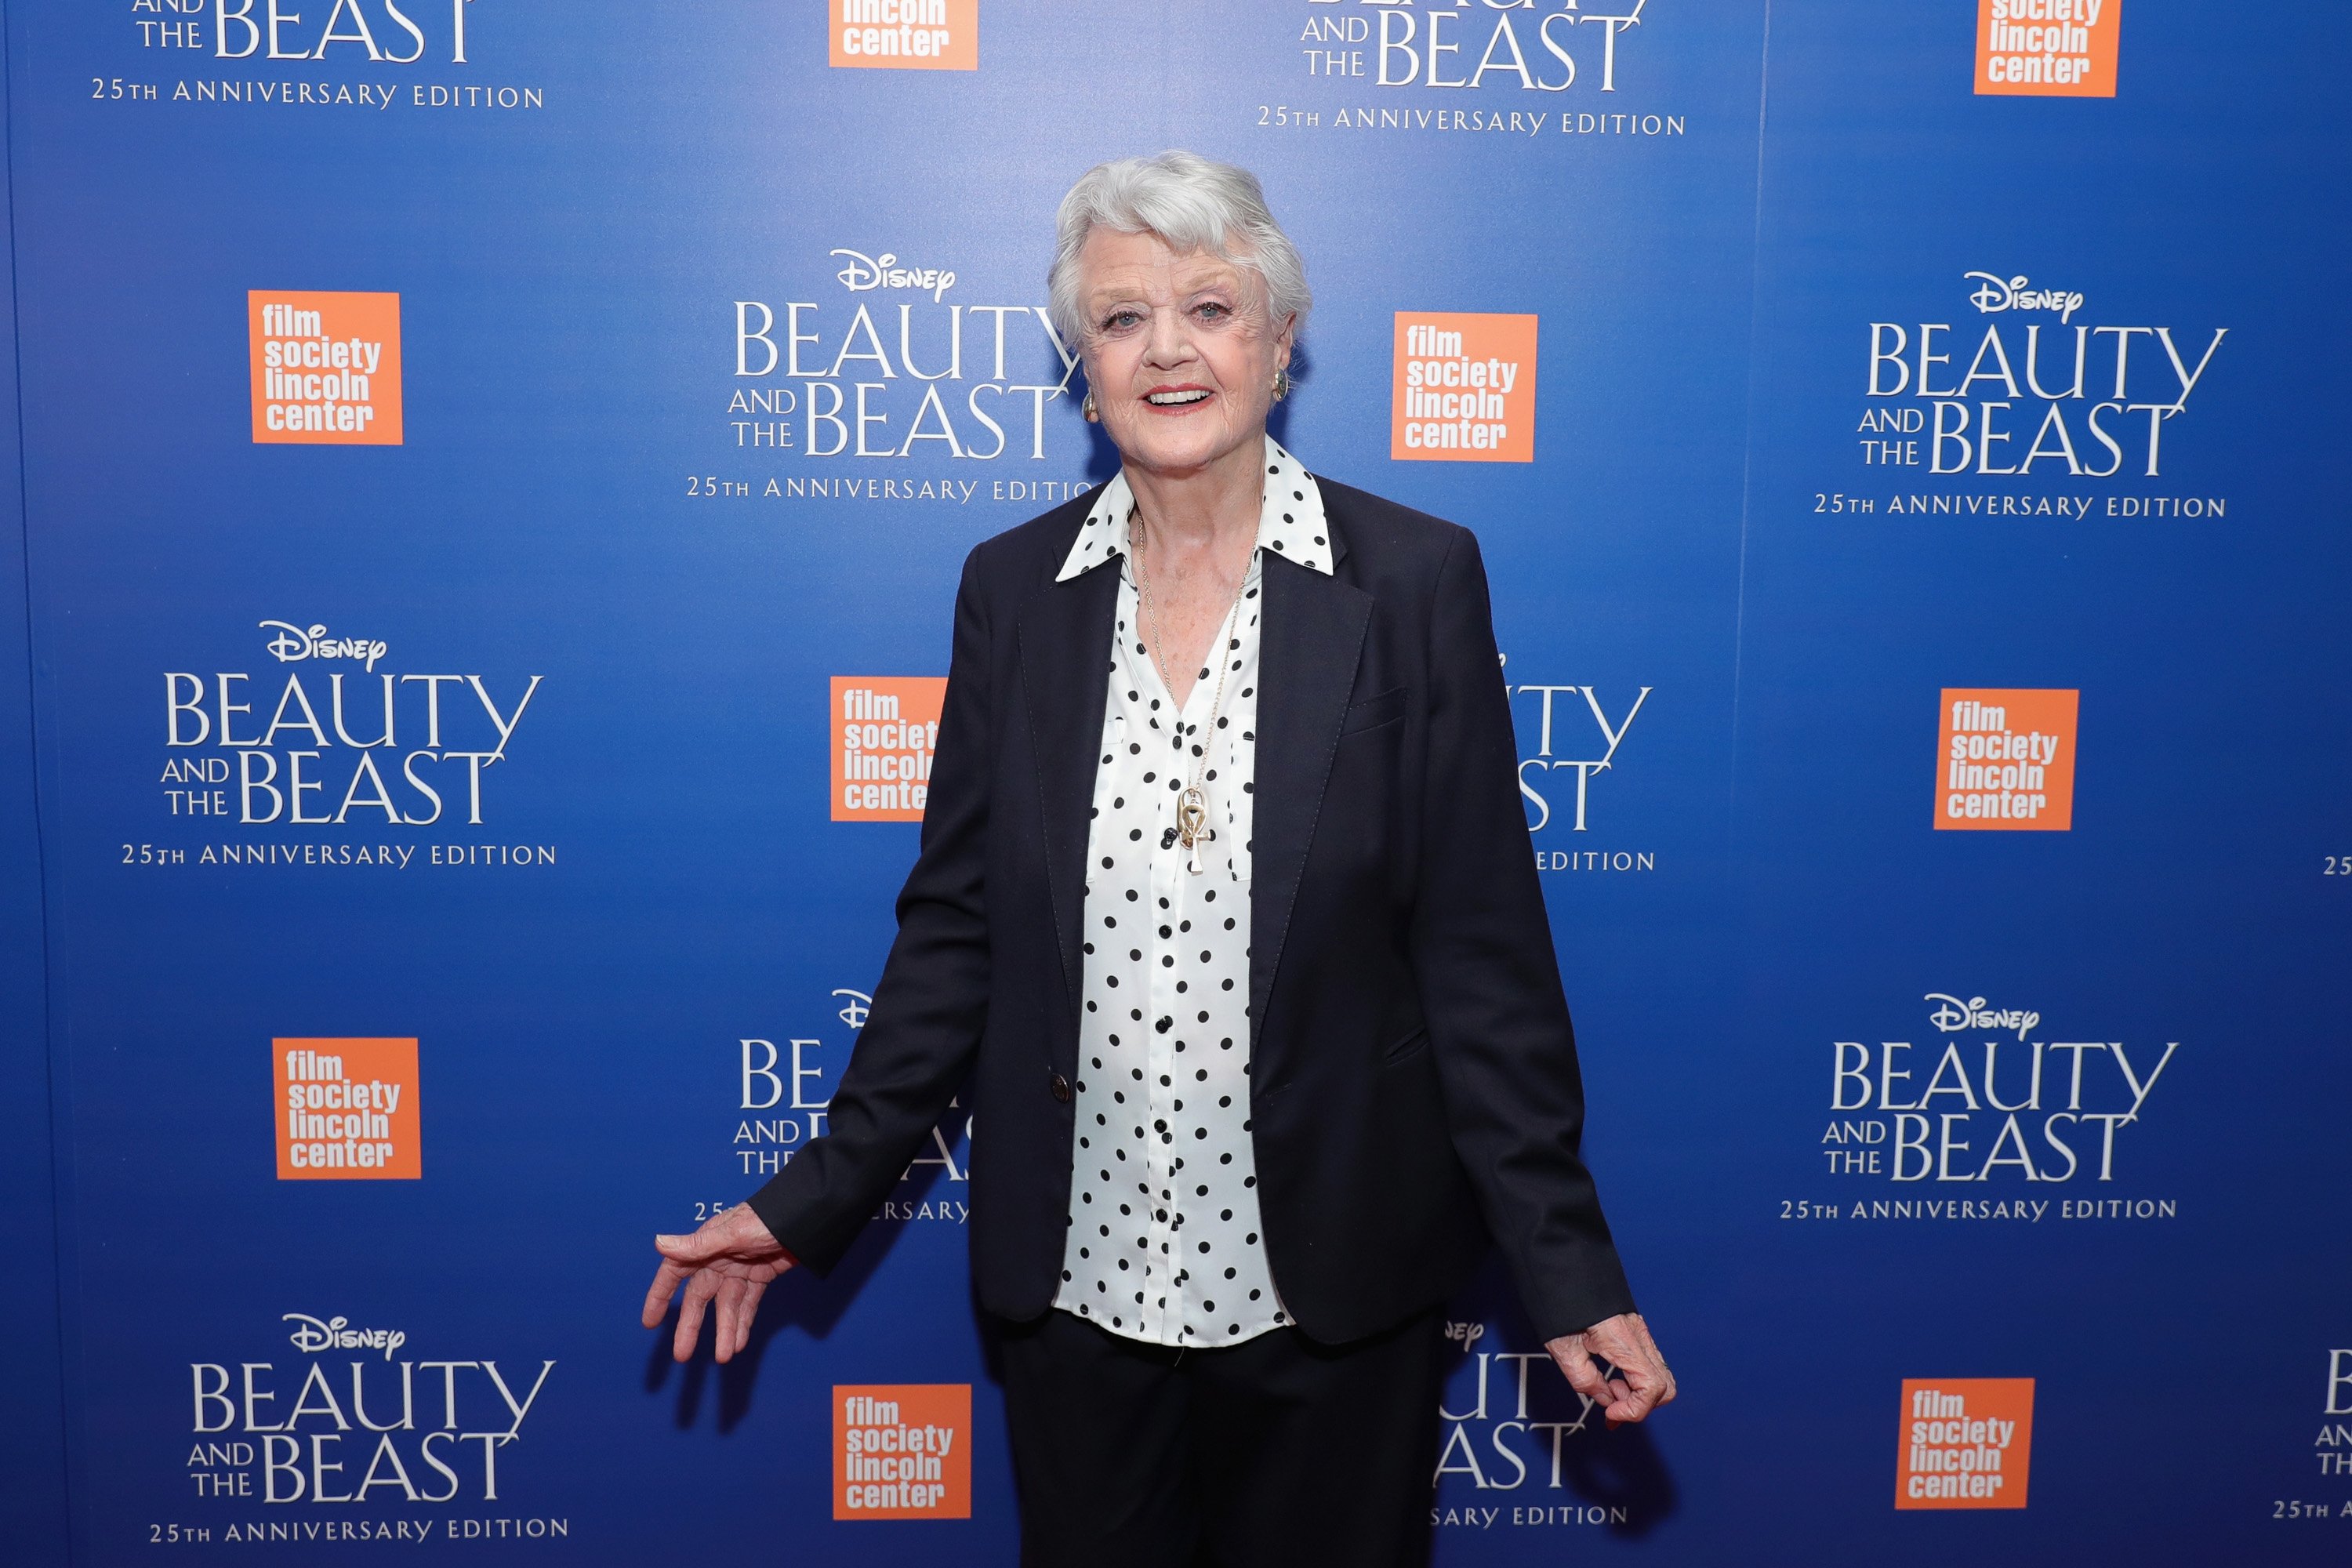 Angela Lansbury attends the special screening of Disney's "Beauty and the Beast" to celebrate the 25th Anniversary Edition release on Blu-Ray and DVD on September 18, 2016, in New York City. | Source: Getty Images